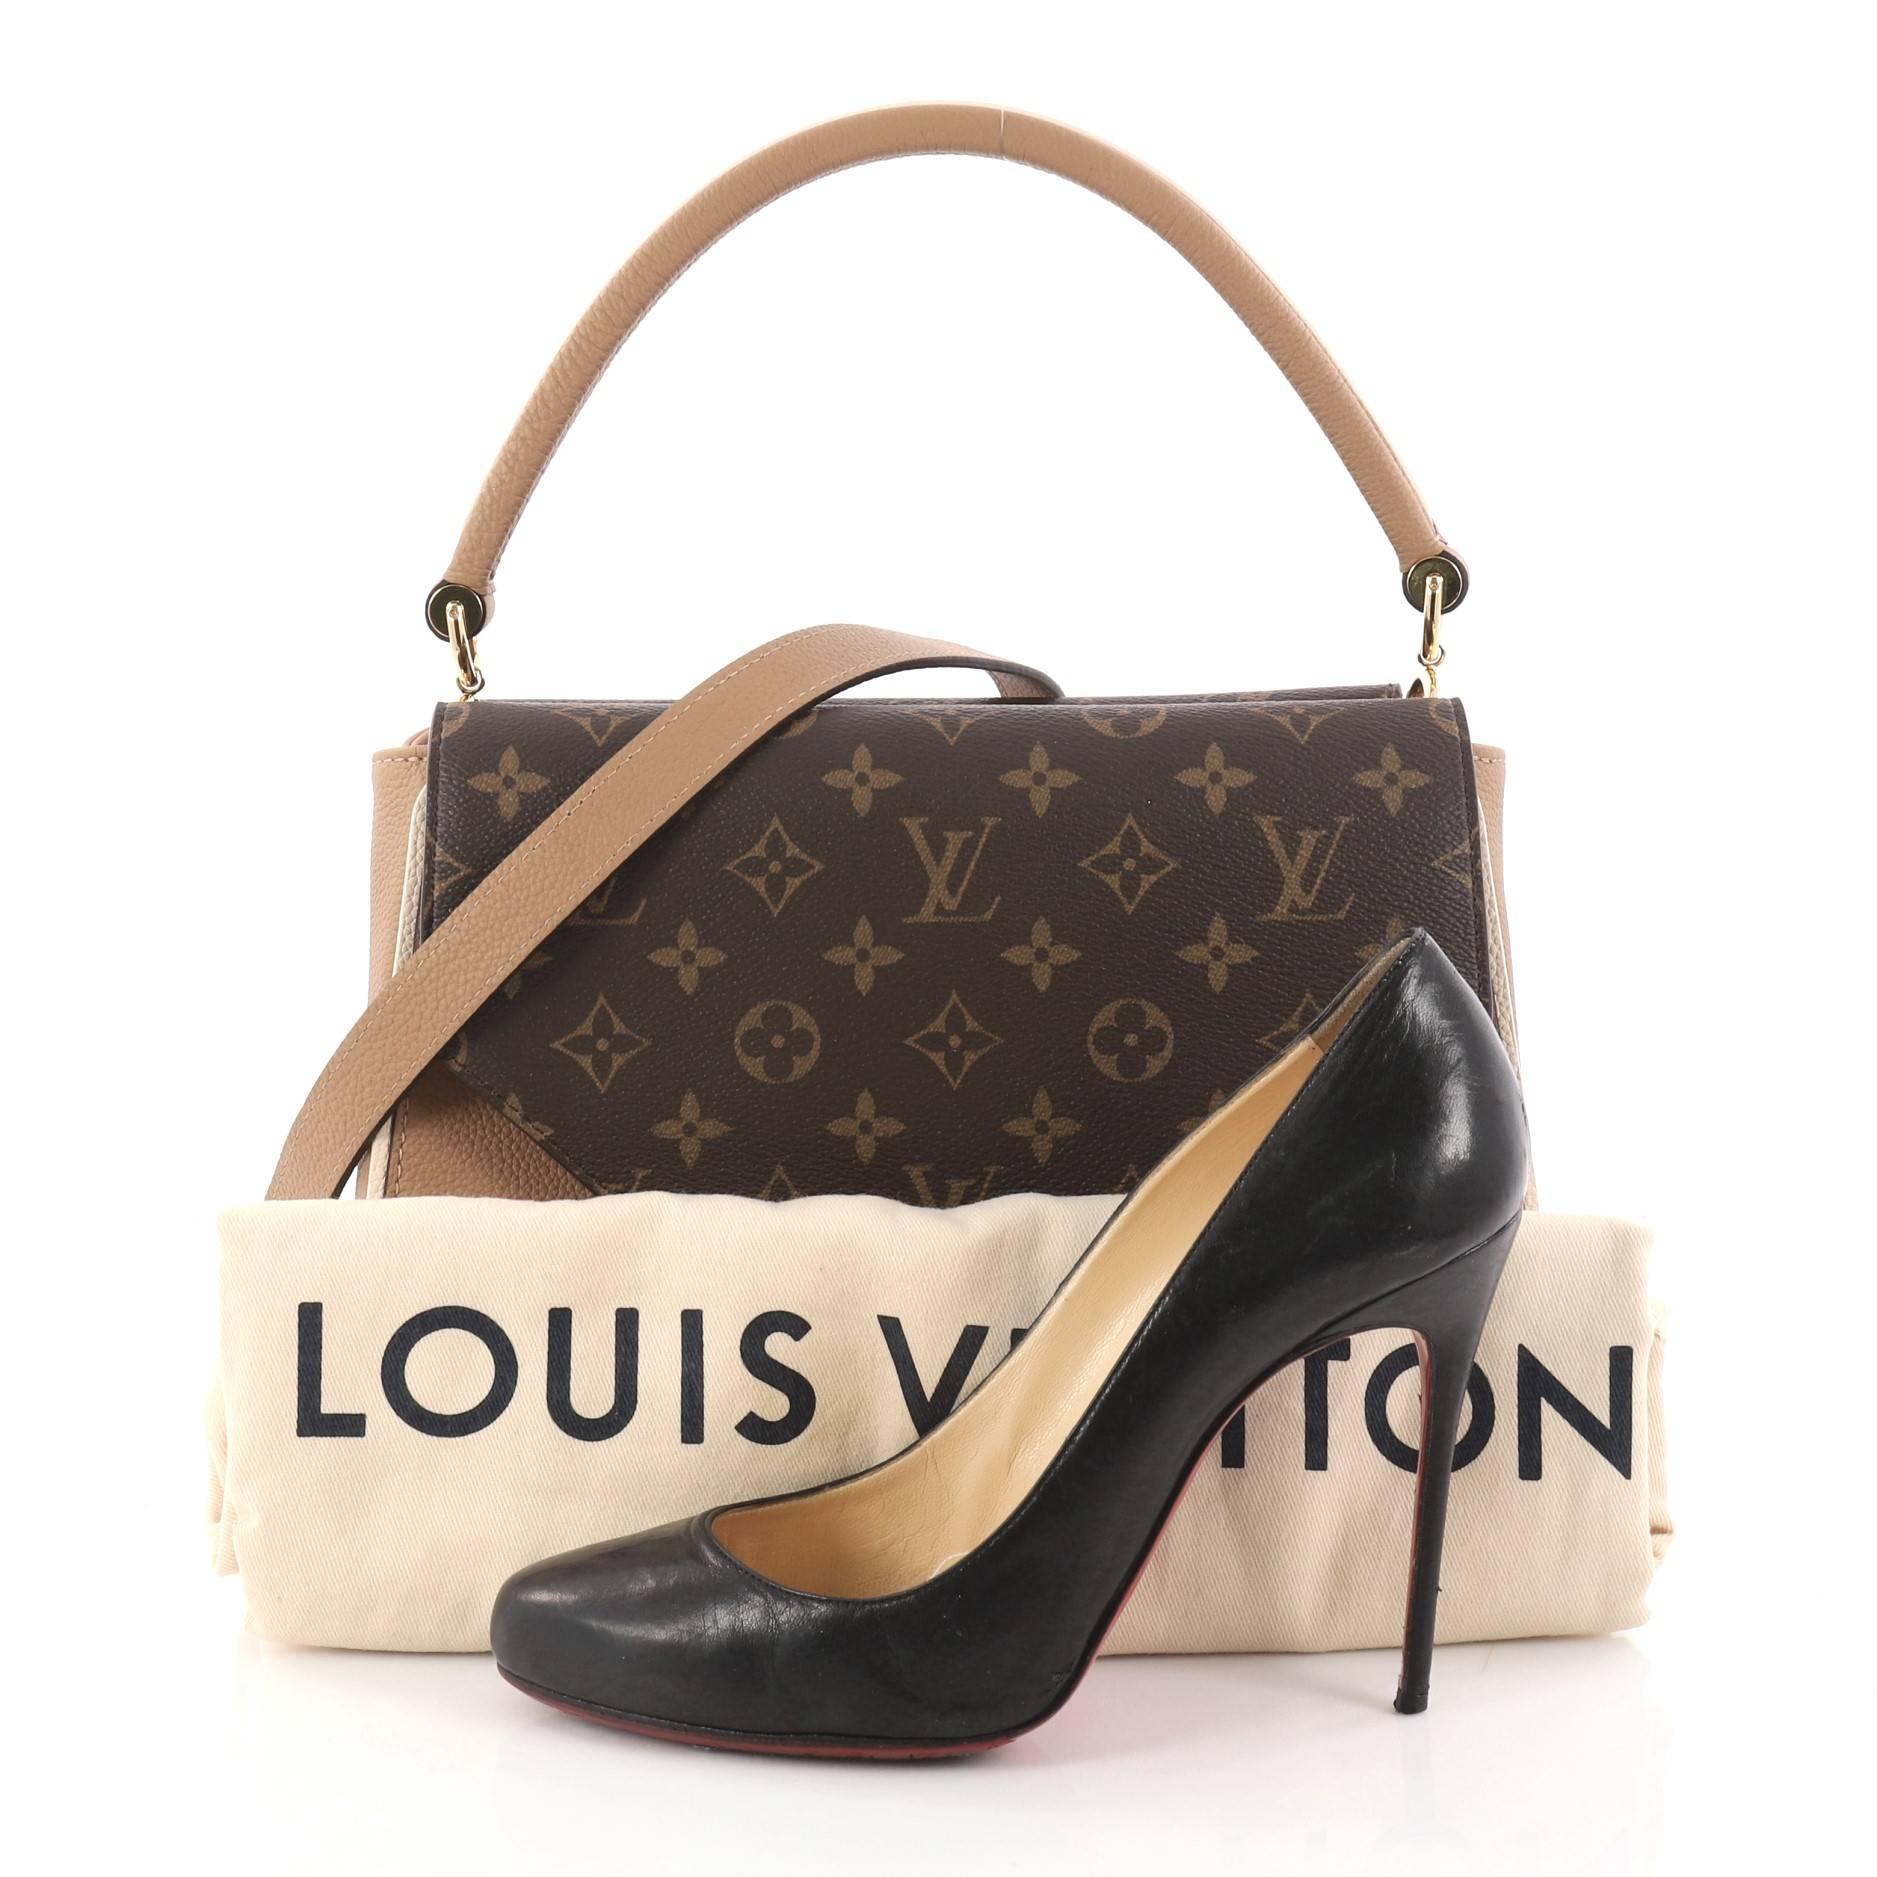 This authentic Louis Vuitton Double V Handbag Calfskin and Monogram Canvas from 2018 is a trendy and elegant bag perfect for your daily excursions. Crafted in brown grainy calf leather and monogram coated canvas with two V-shaped flaps, this bag